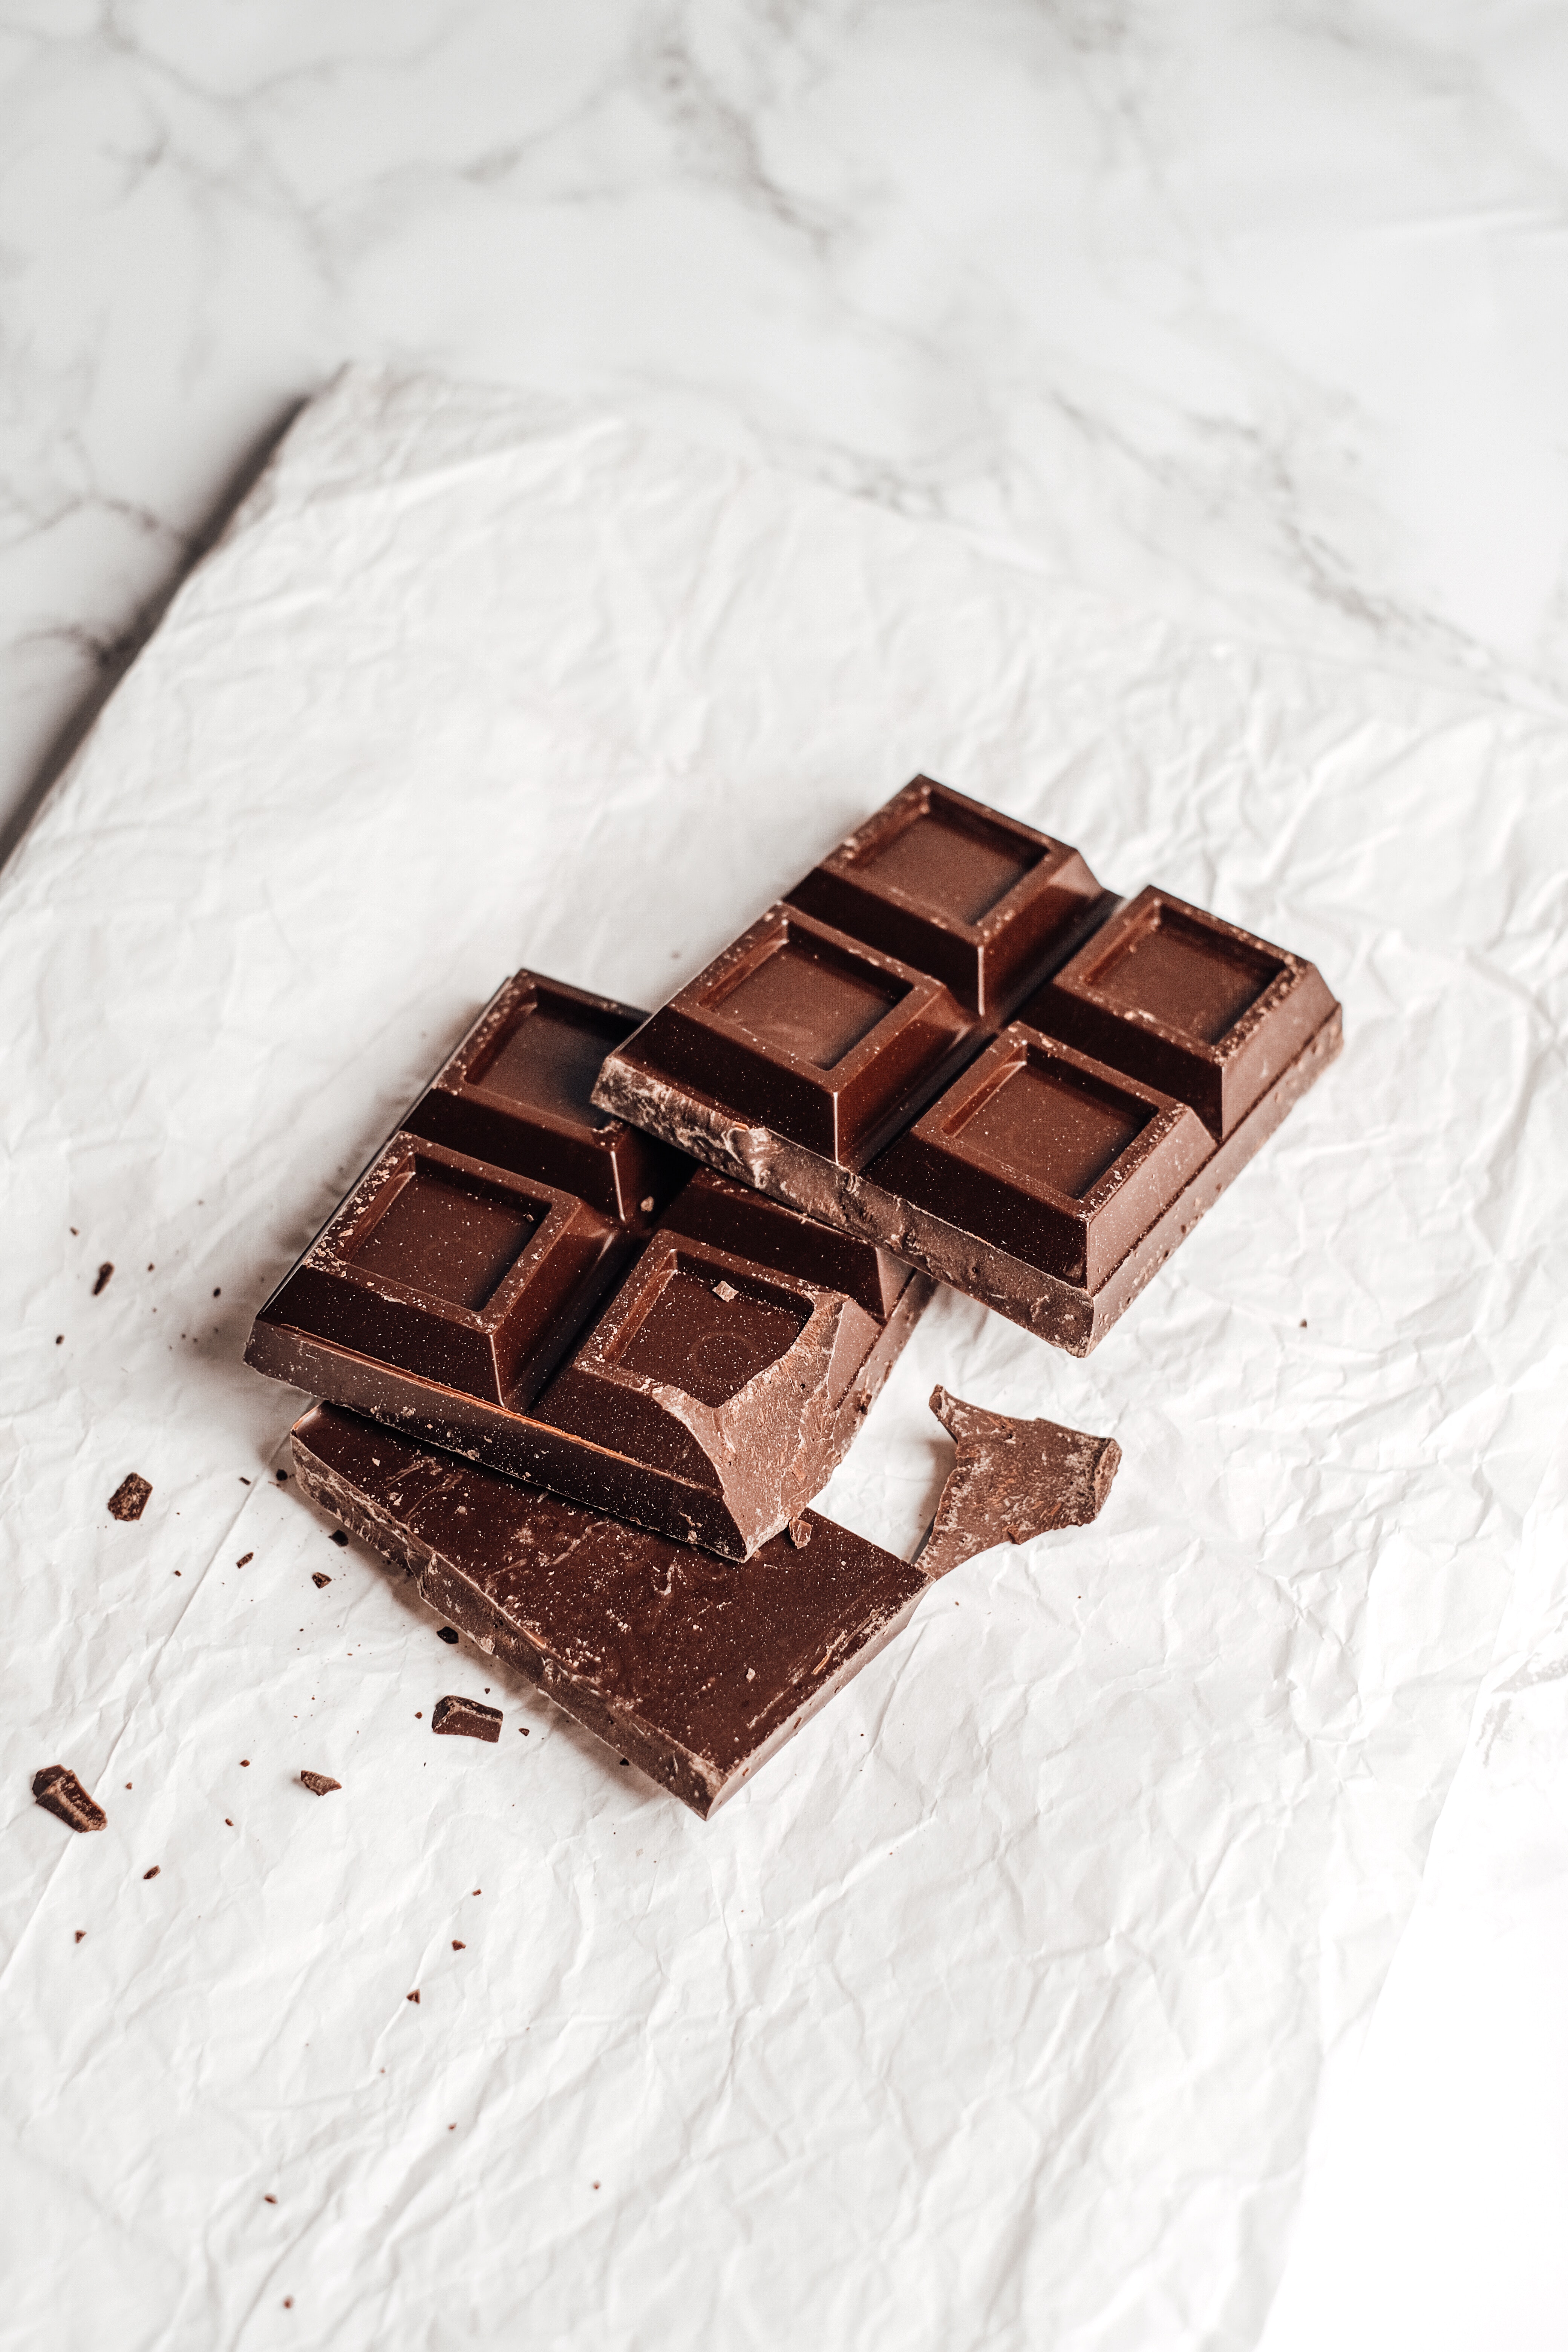 dark-chocolate-eating-for-your-menstrual-cycle-nutrition